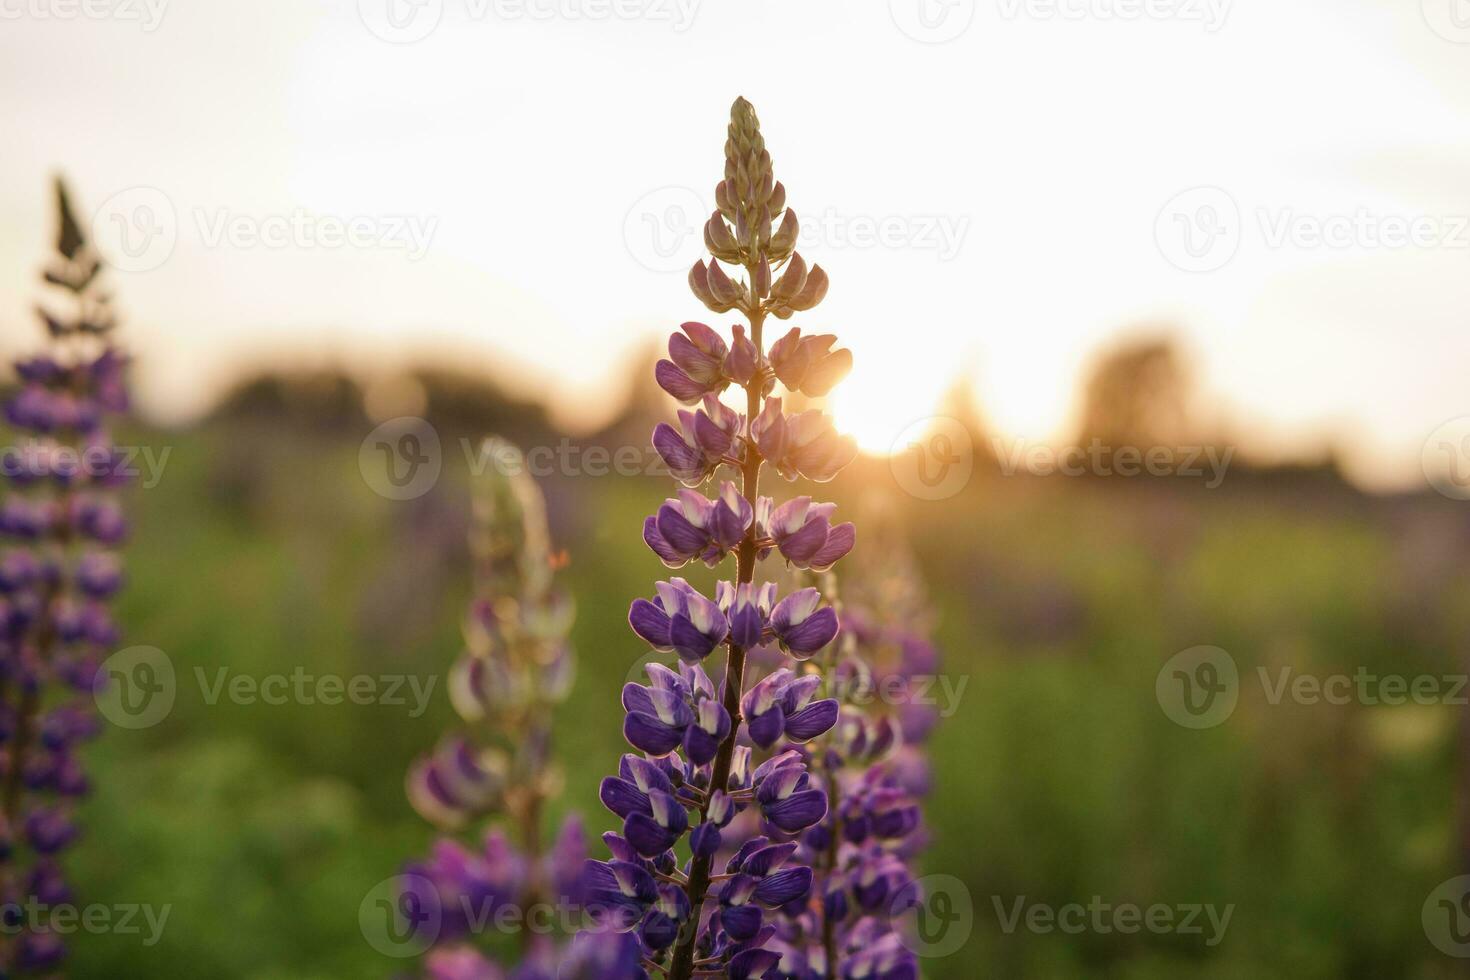 photos of lupine flowers in nature